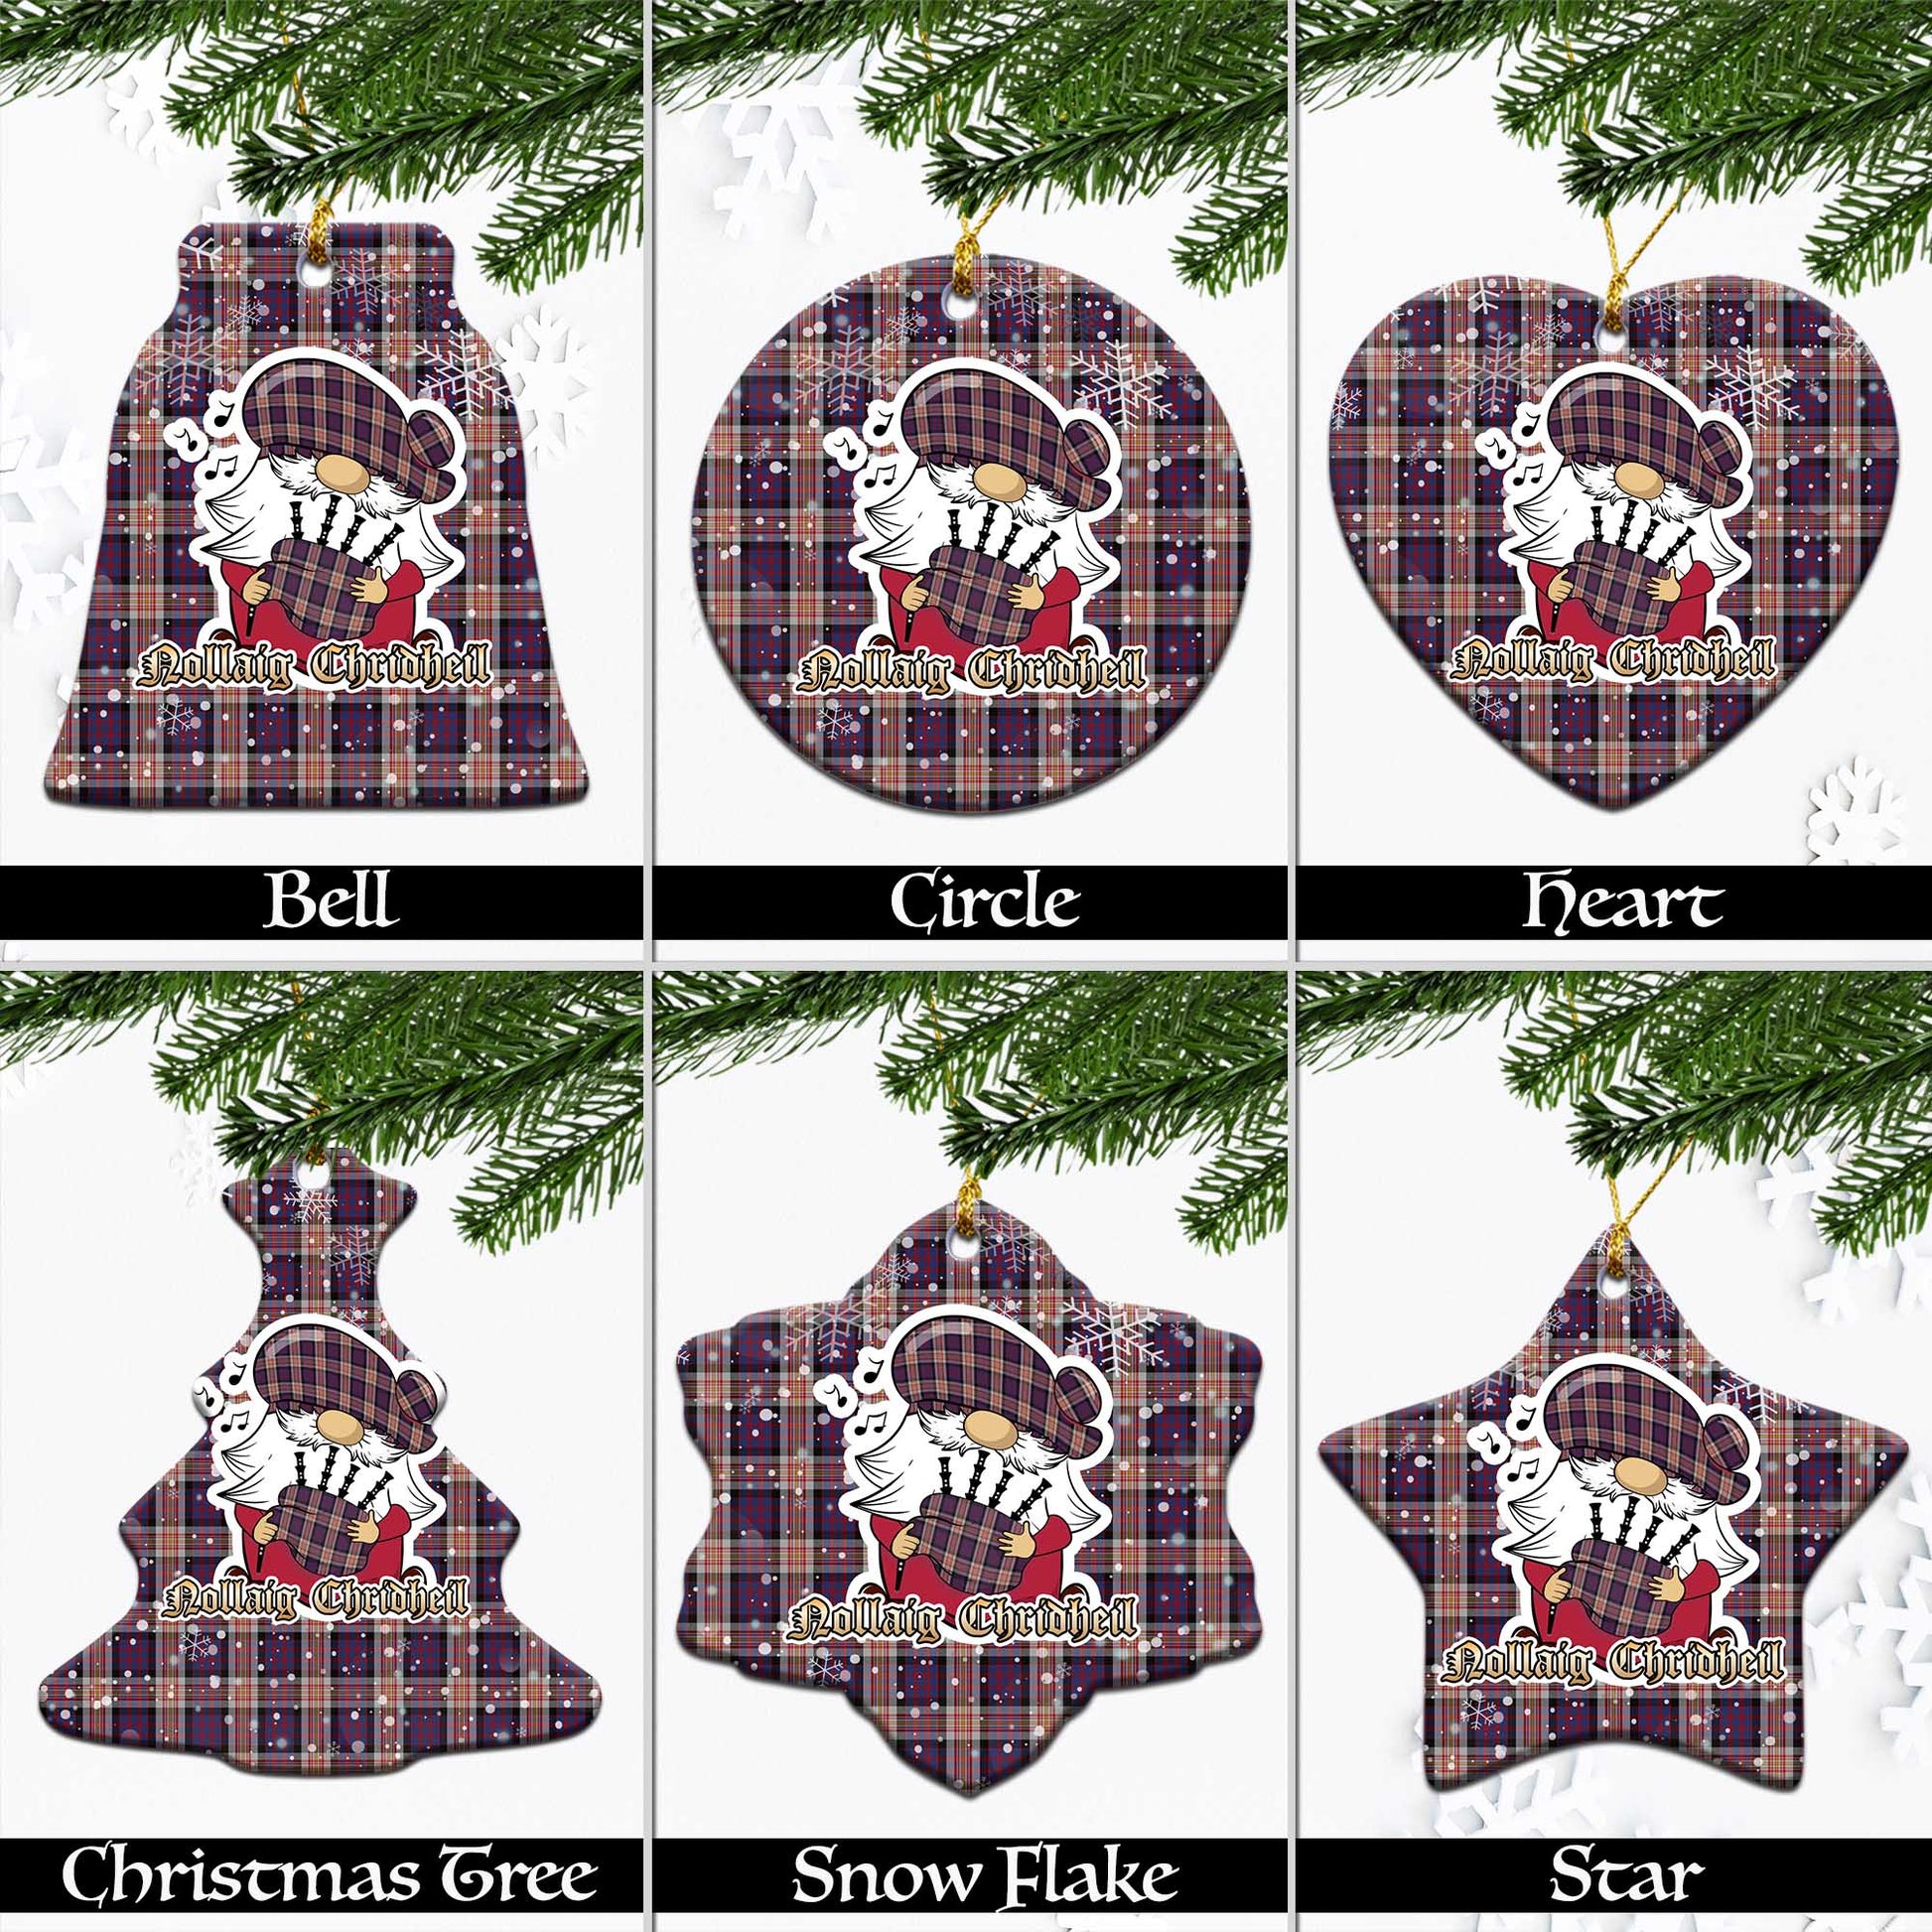 Carnegie Tartan Christmas Ornaments with Scottish Gnome Playing Bagpipes Ceramic - Tartanvibesclothing